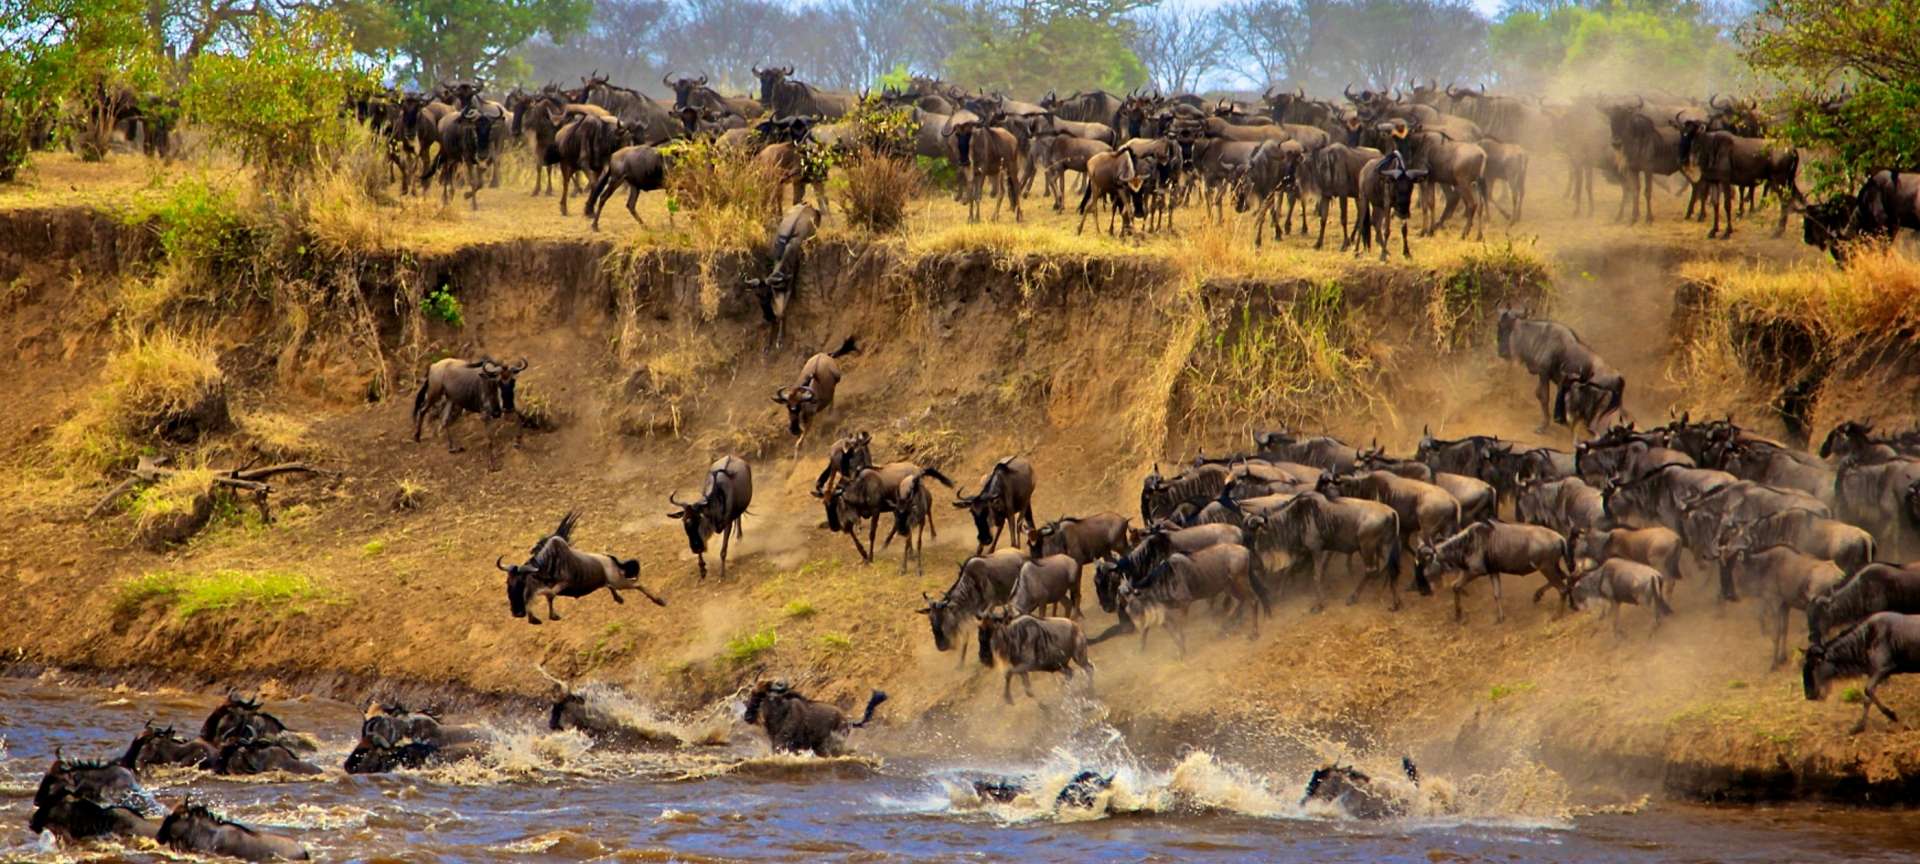 Great Wildebeest Migration, Full facts & Information about the Migration